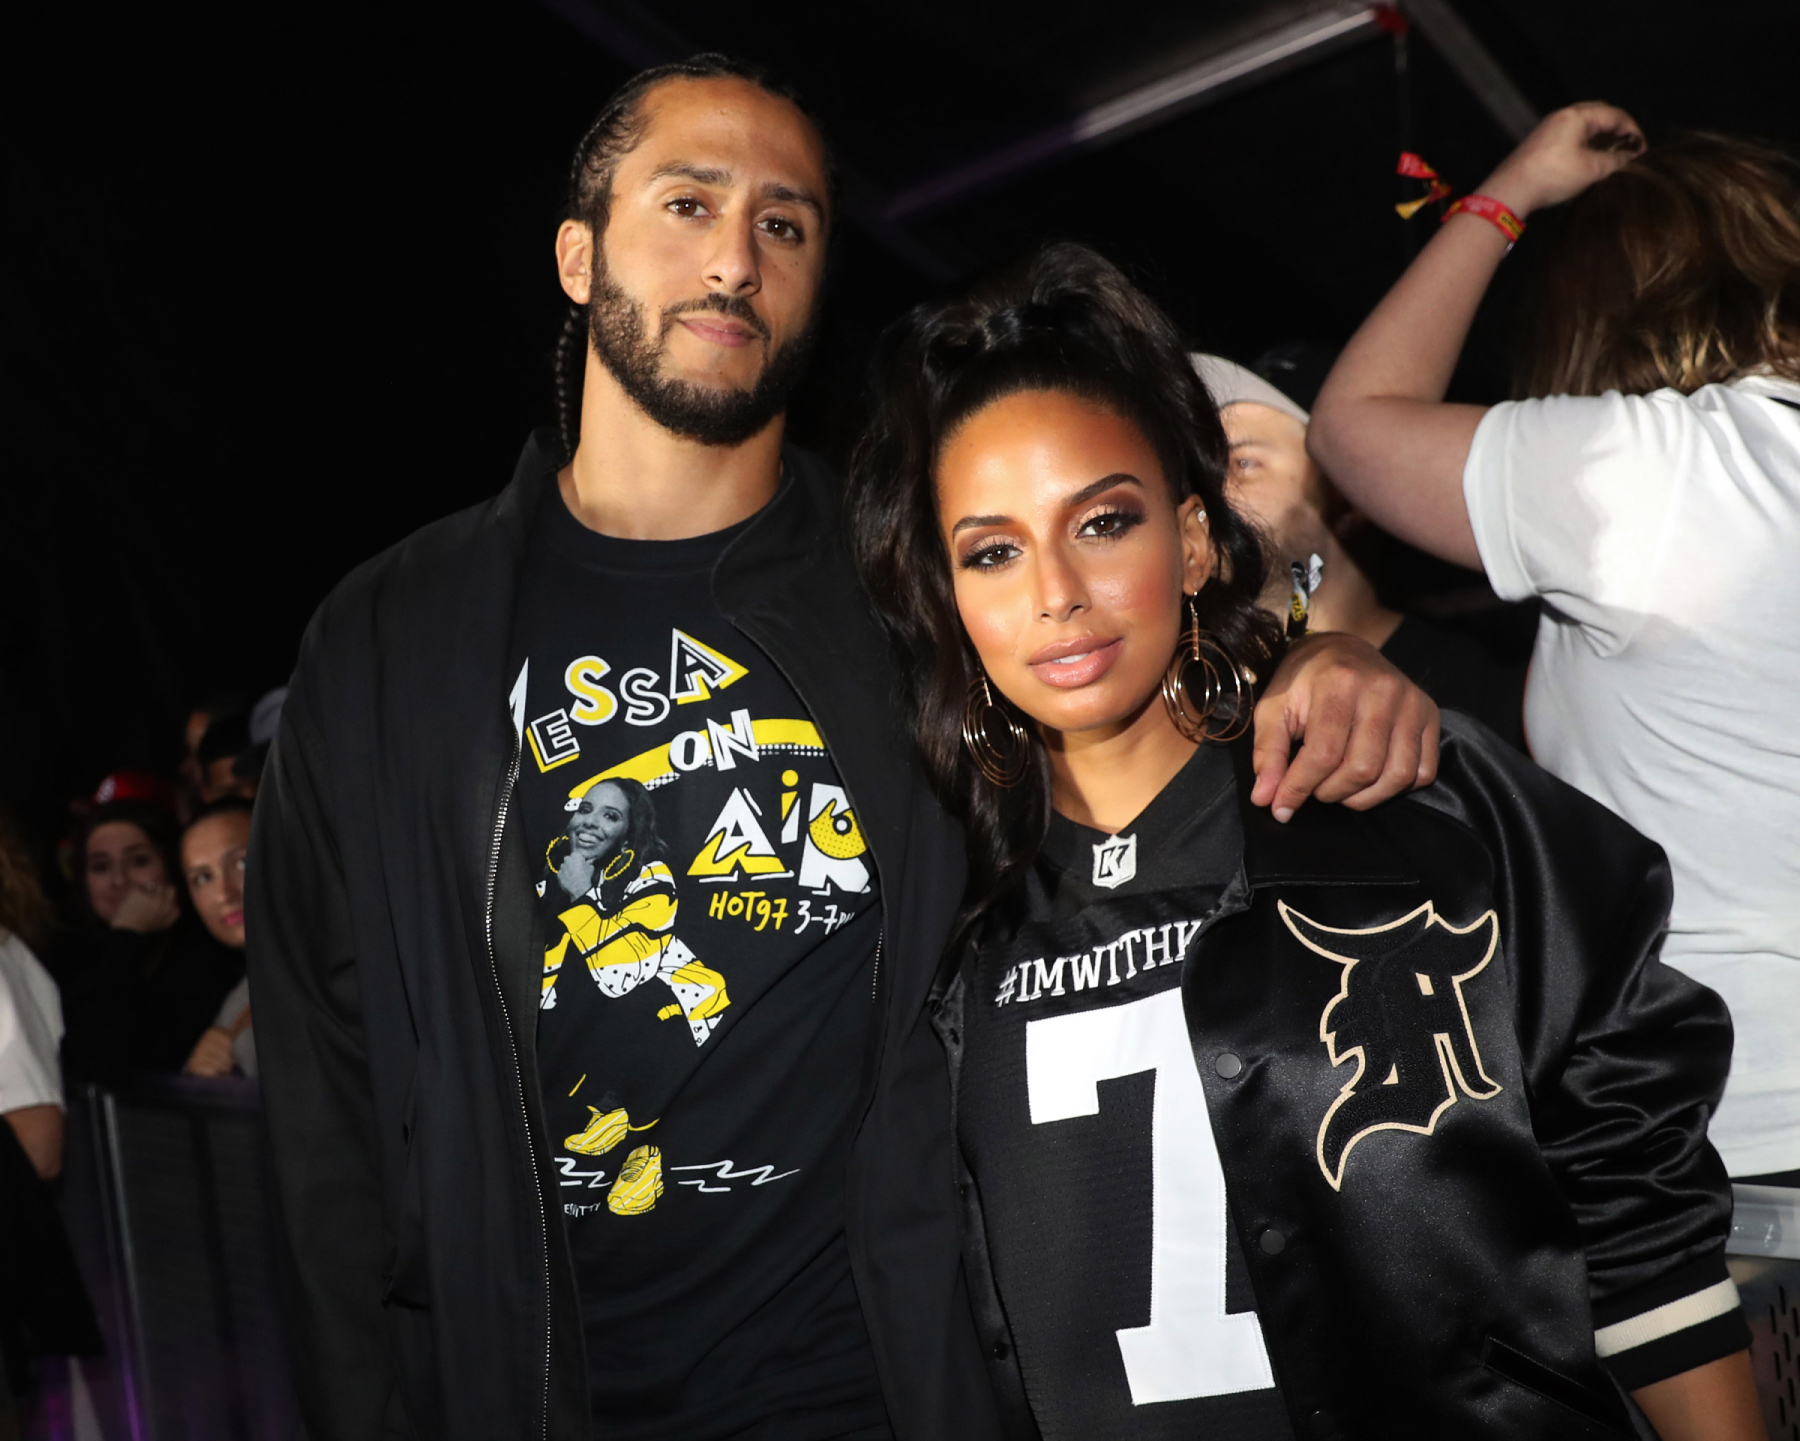 Colin Kaepernick and His Girlfriend Nessa Send the NFL a Strong Message